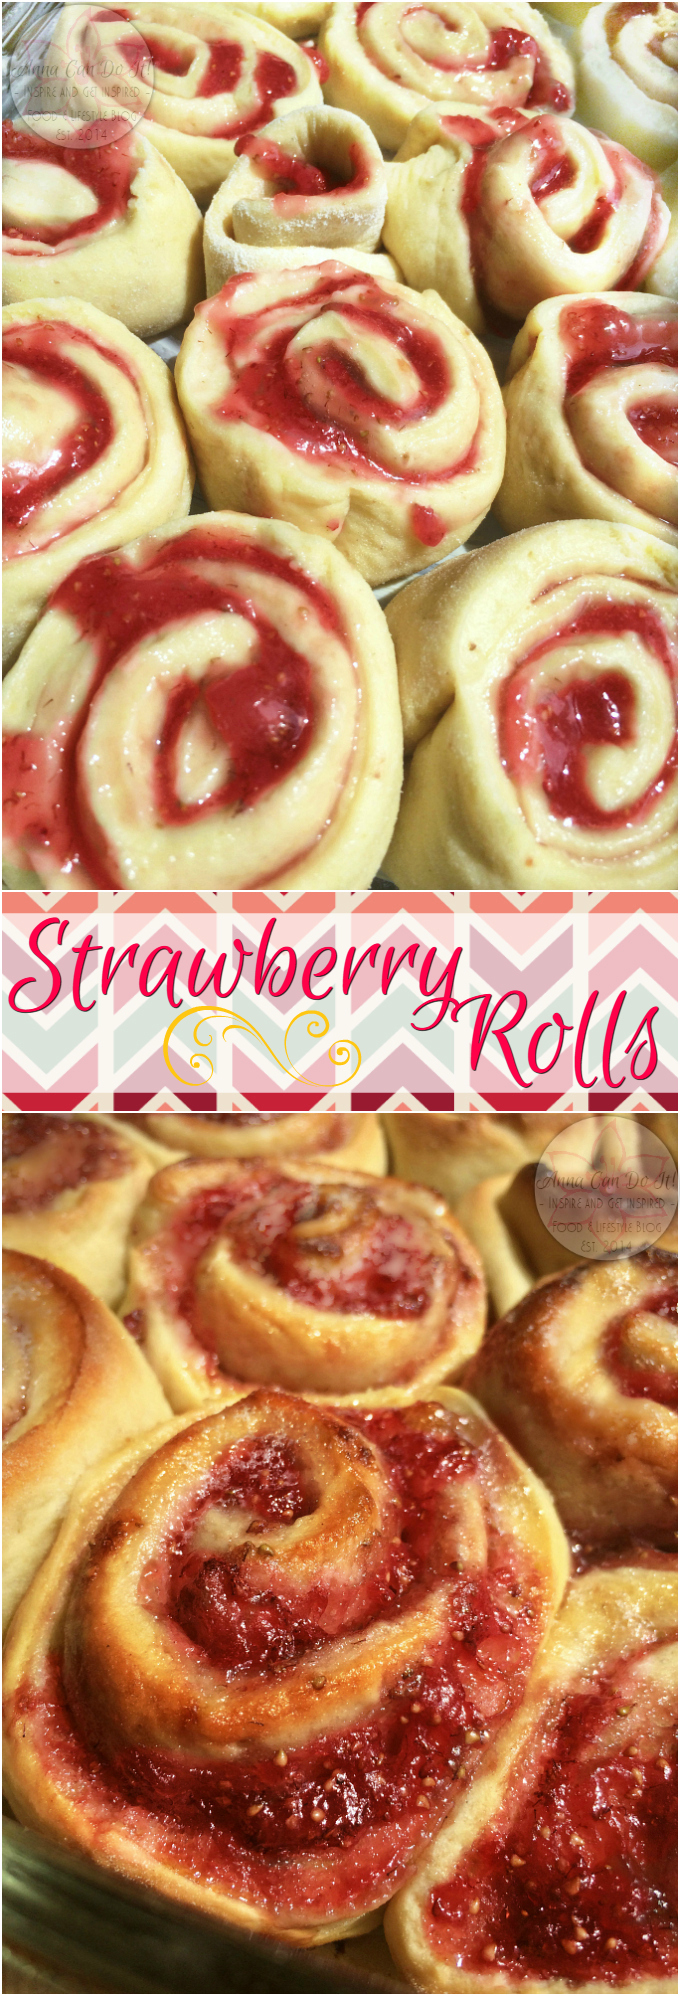 Strawberry Rolls - Anna Can Do It! * It's Summer time, so my rolls addiction is back on with new favorite flavors! Since it's strawberry season too, I couldn't miss the opportunity to make these gorgeous Strawberry Rolls! These Strawberry Rolls are so delicious, naturally sweet and oh so soft!